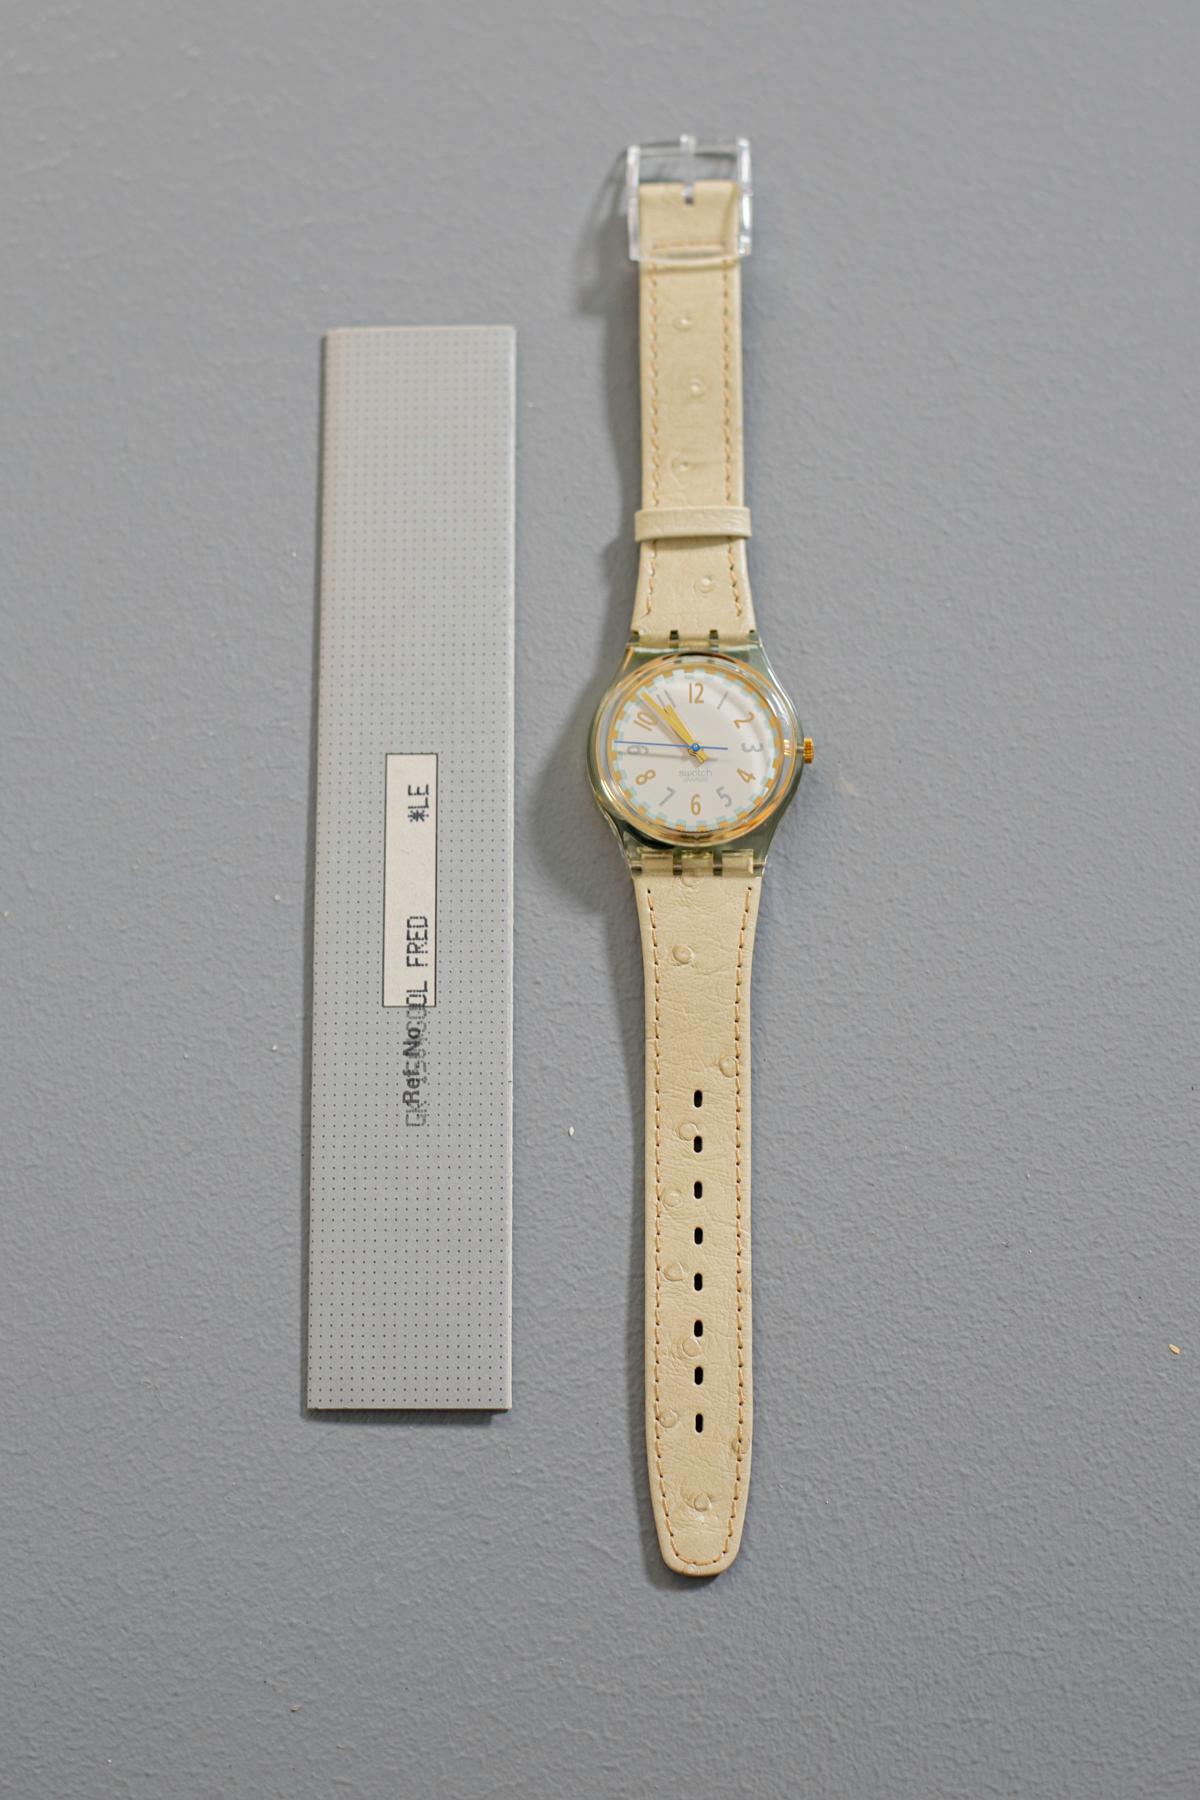 Swatch of the 1993 collection, a classic design, the strap is made of a soft cream colored leather, to embellish the watch the dial with golden finishes. A versatile Swatch to wear every day without ever getting tired.

Case Material: Plastic
Strap